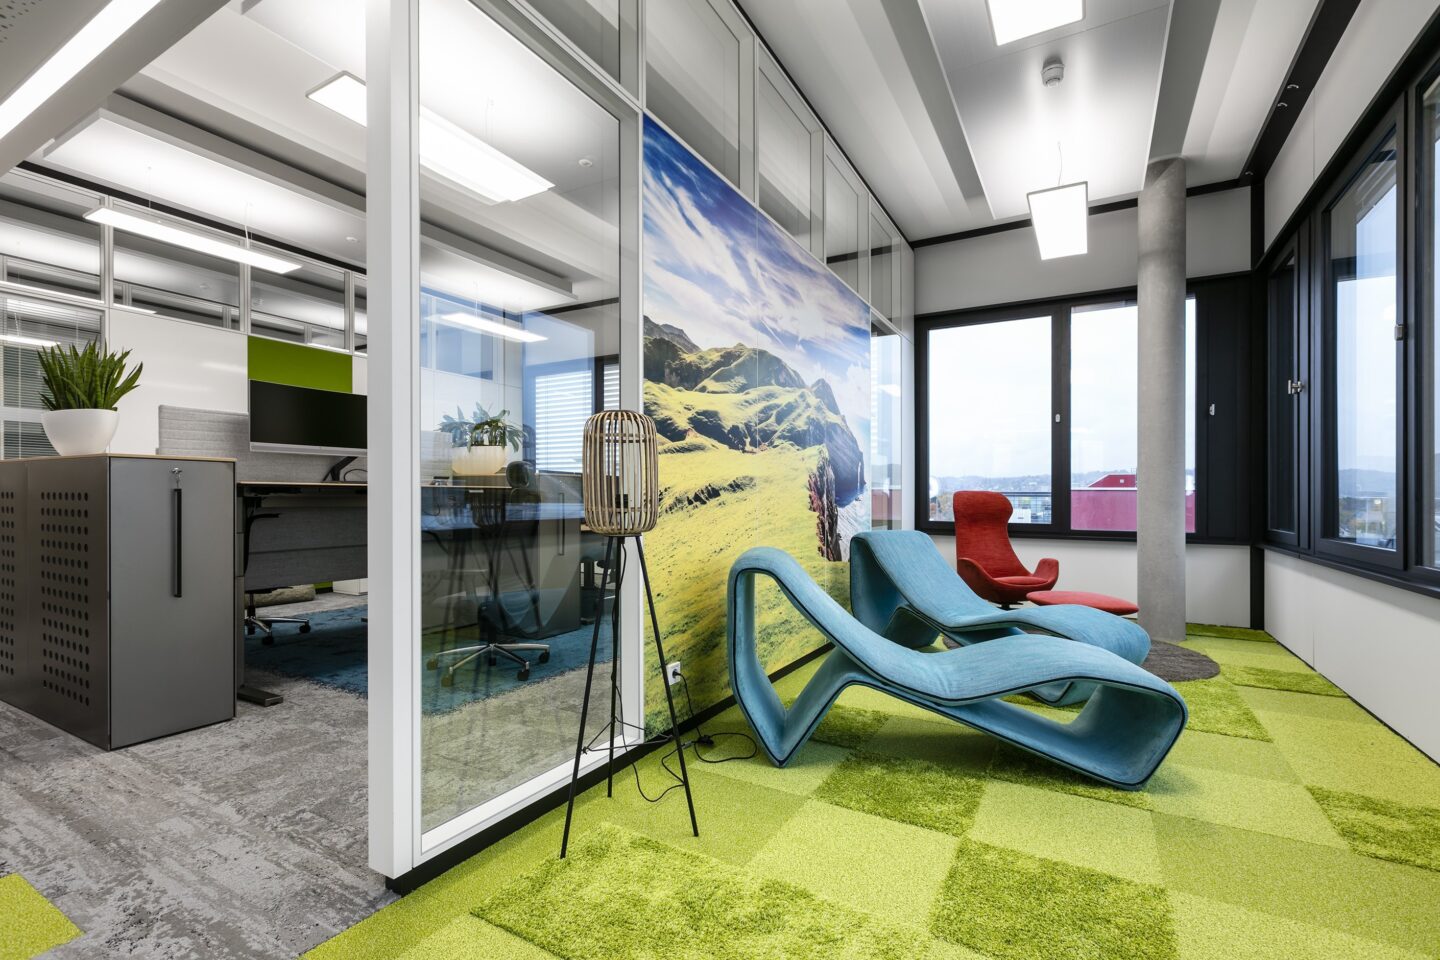 feco-feederle│partition wall systems│Fiducia, Karlsruhe